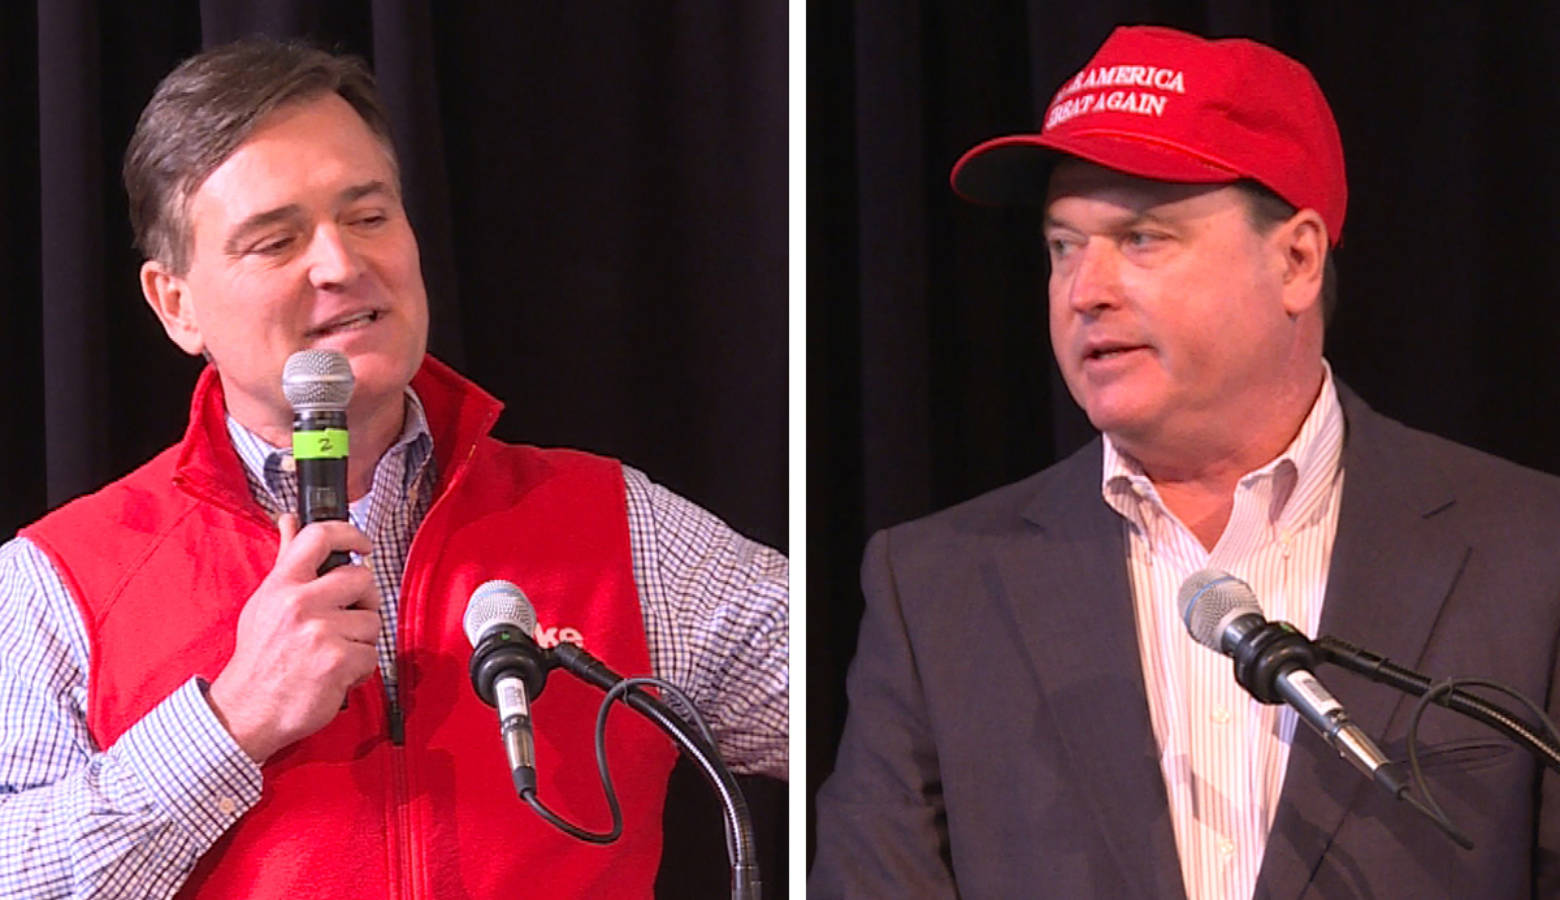 Indiana U.S. Representatives and U.S. Senate candidates, Luke Messer and Todd Rokita, won't say for sure whether they'll support a path to citizenship for DACA recipients. (Tyler Lake/WTIU)